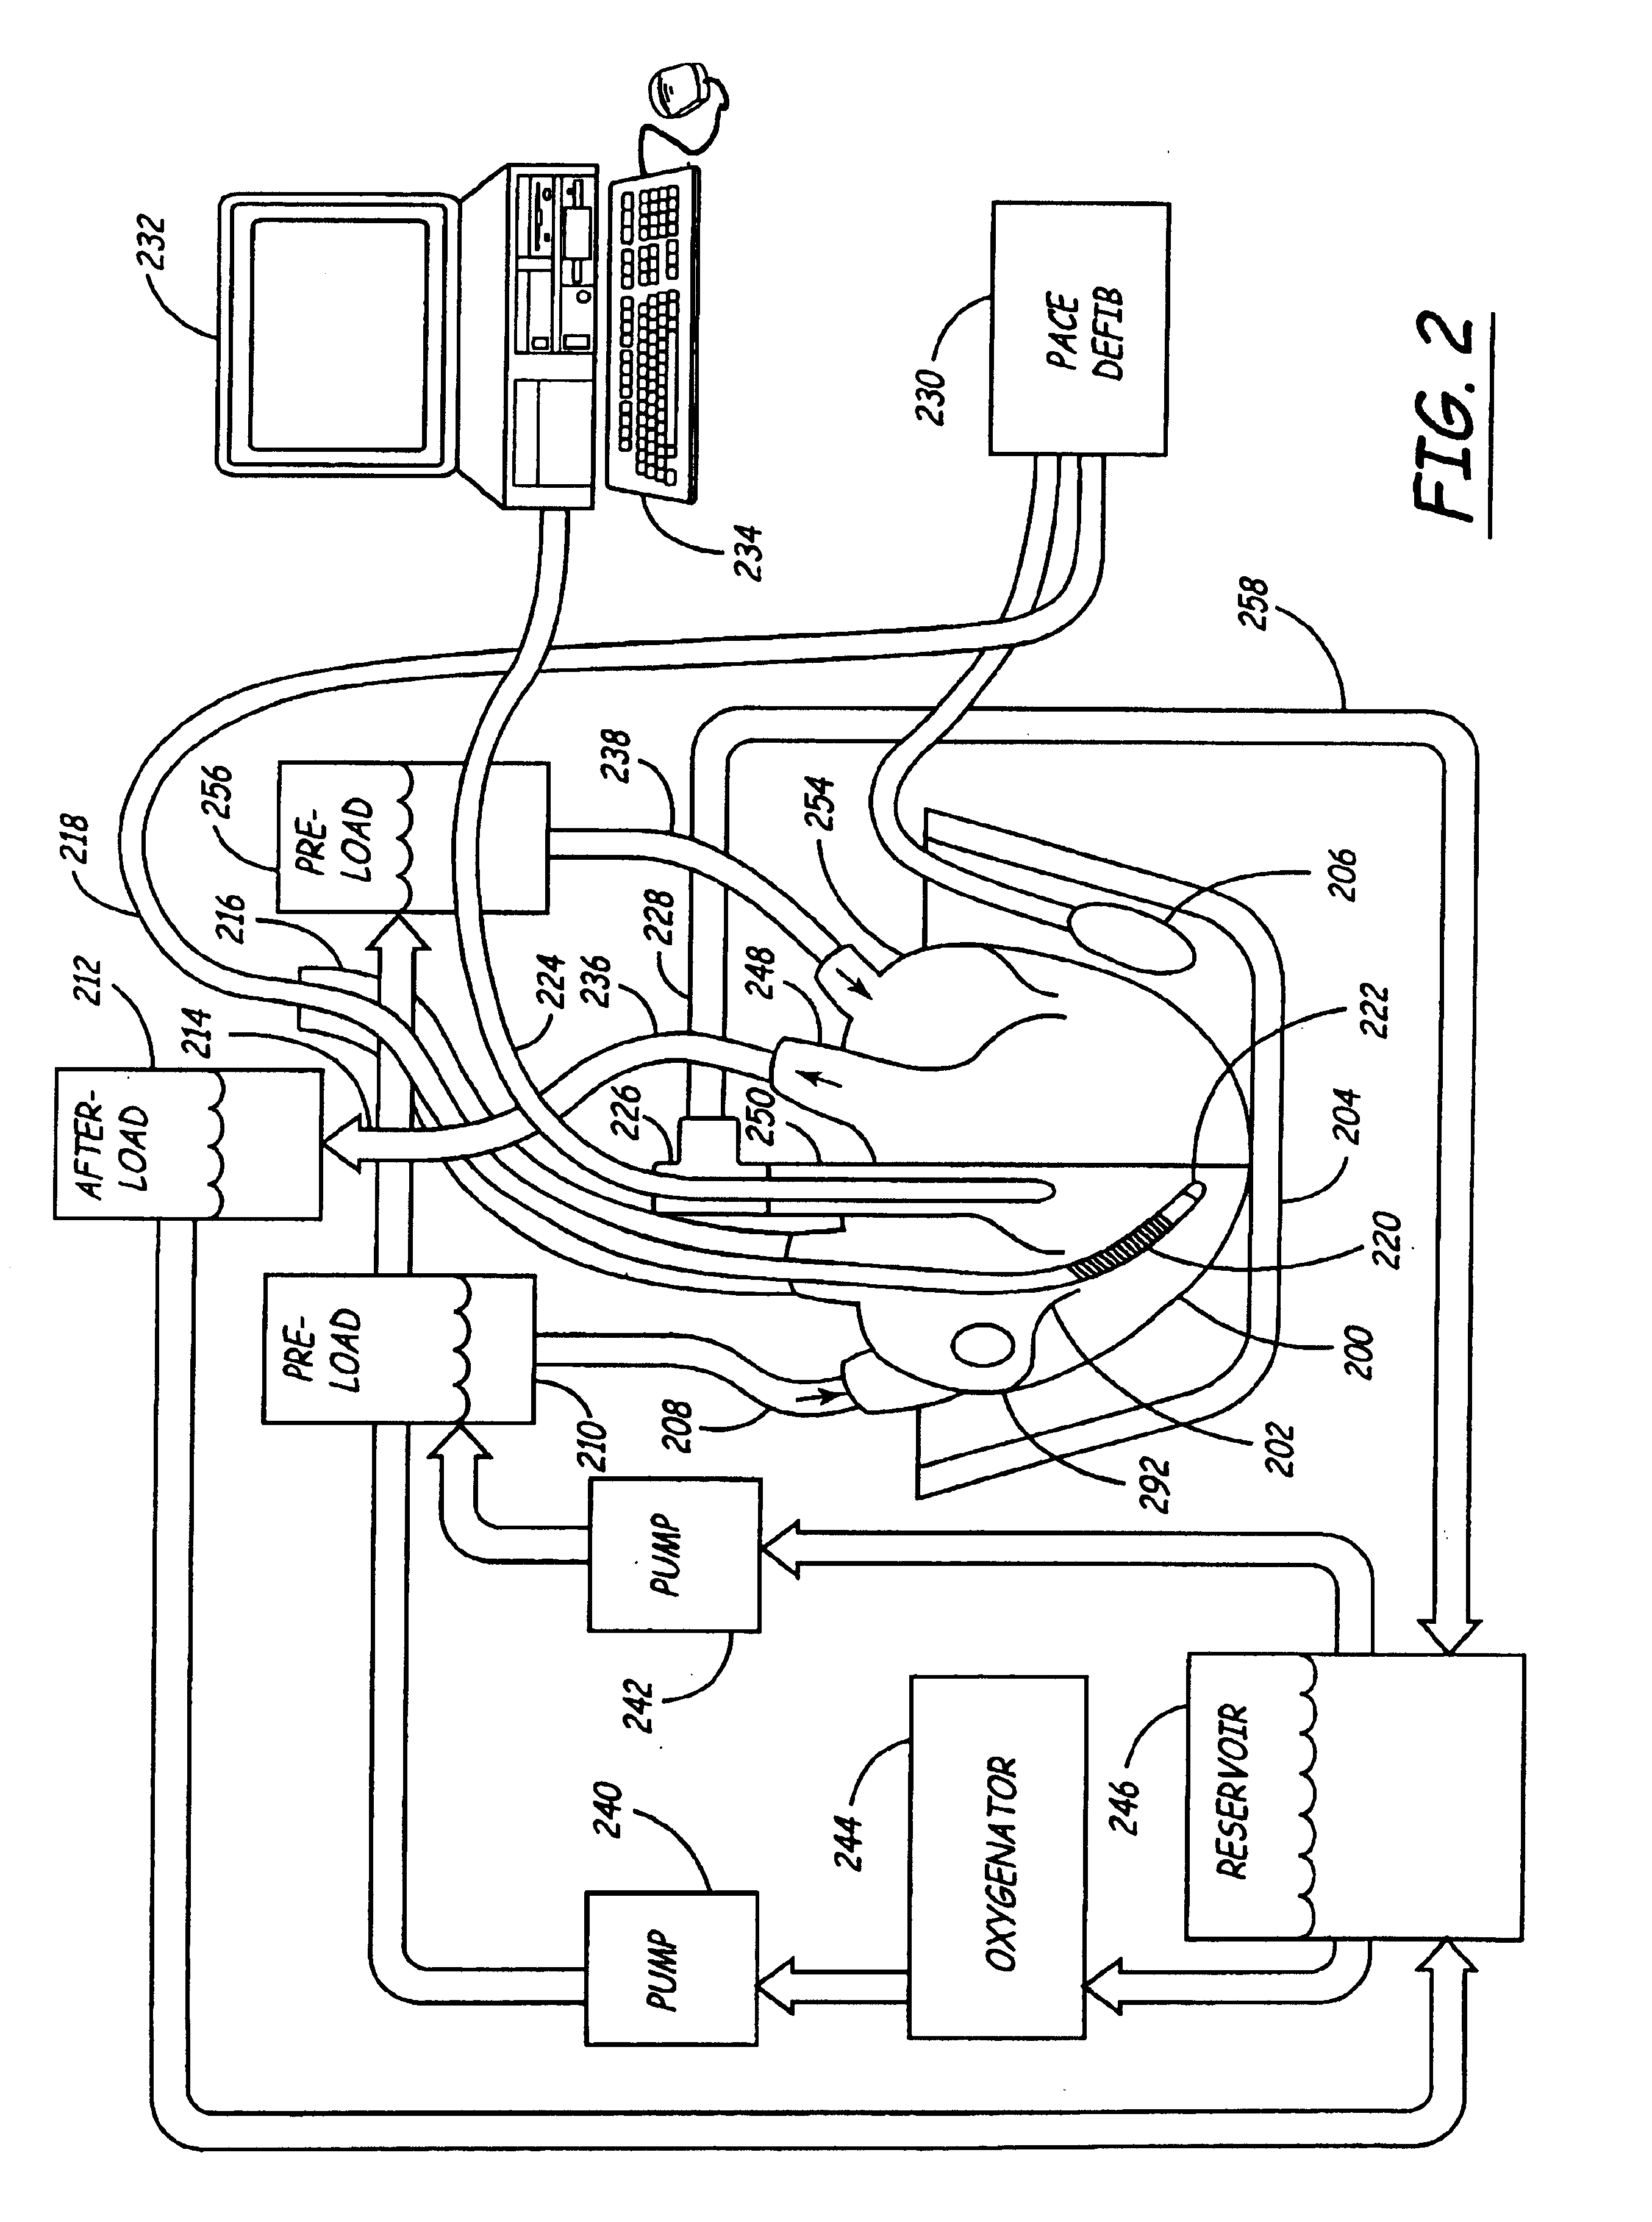 Isolated perfused heart preparation and method of use